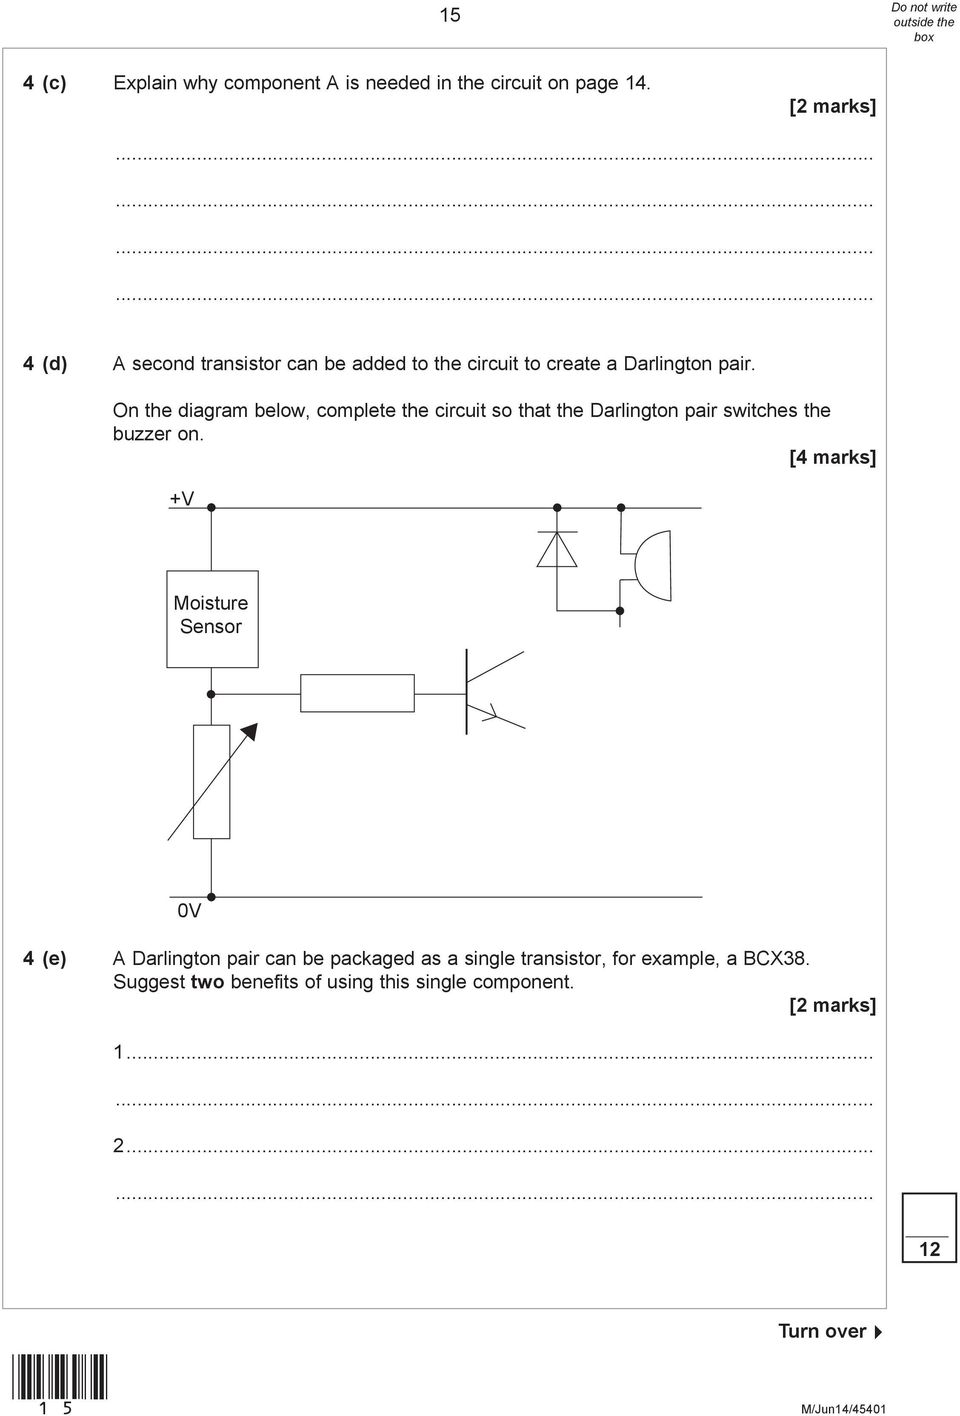 On the diagram below, complete the circuit so that the Darlington pair switches the buzzer on.